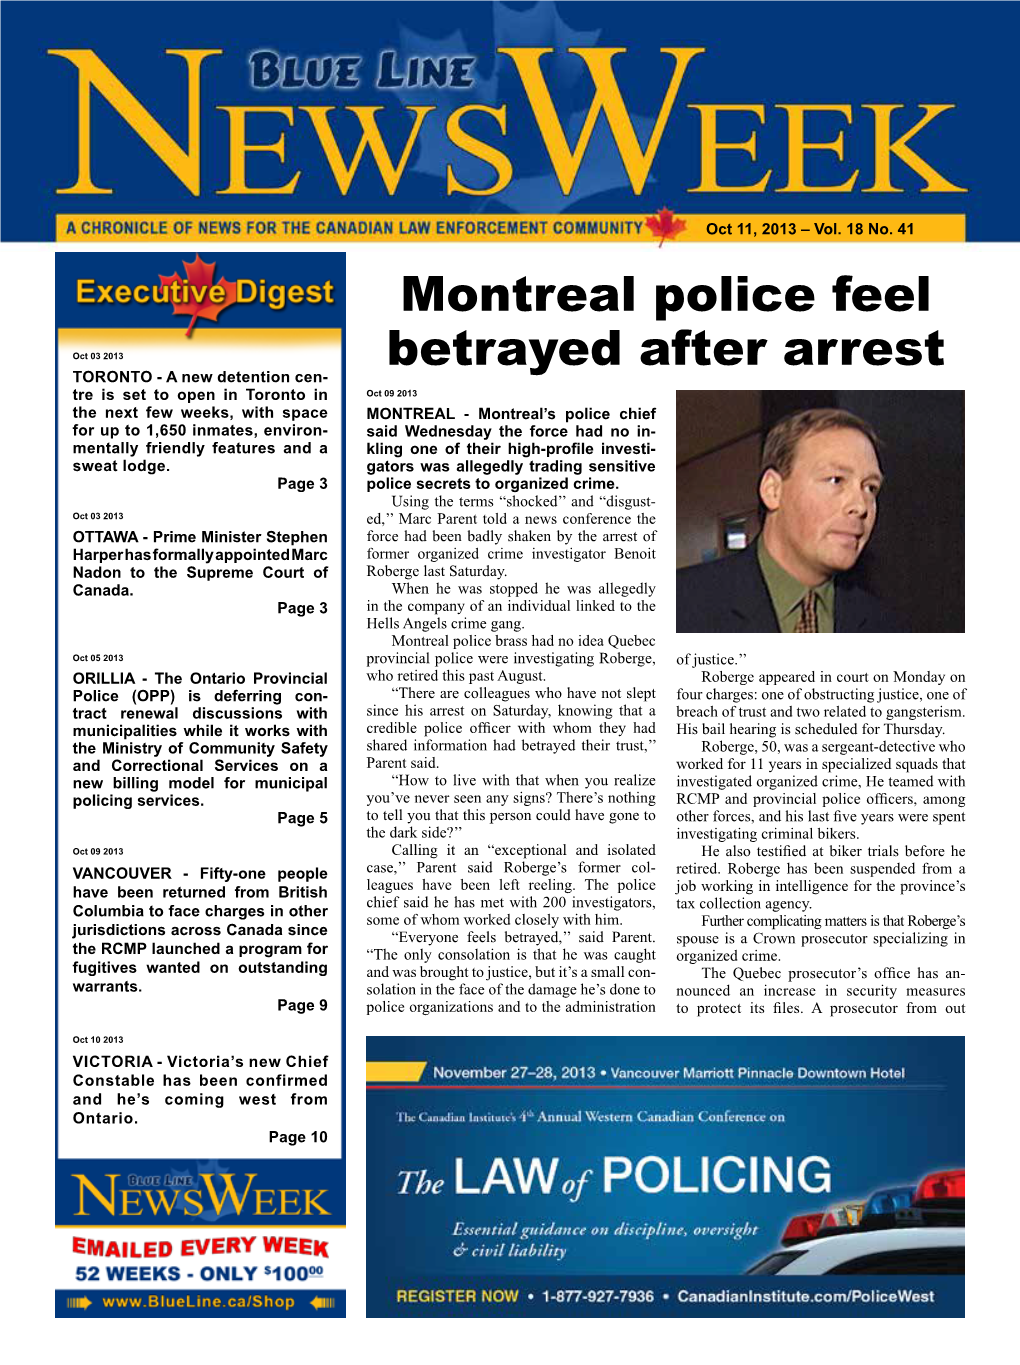 Montreal Police Feel Betrayed After Arrest